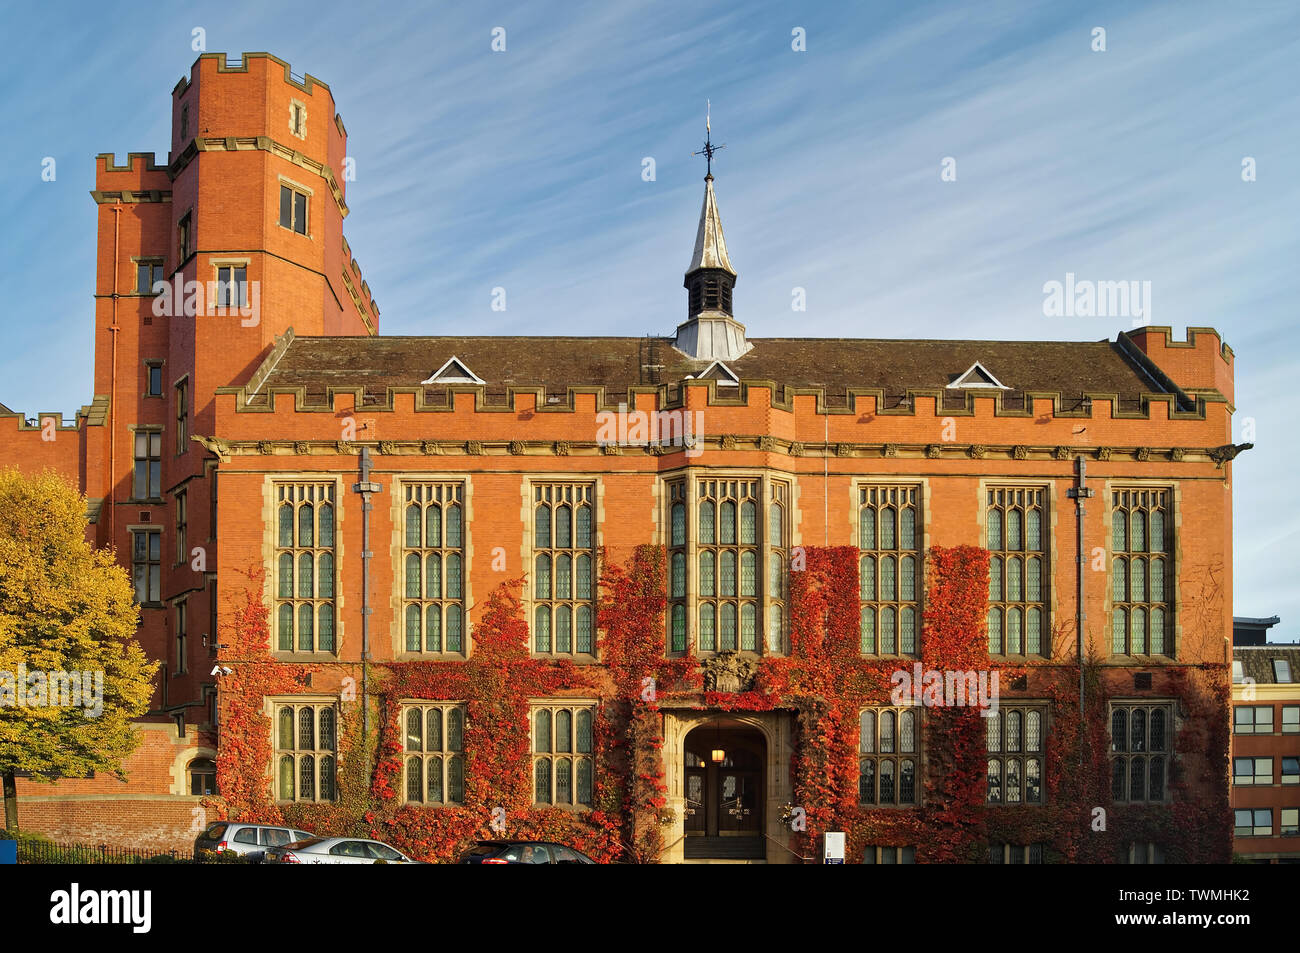 UK,South Yorkshire,Sheffield,Firth Corte costruzione,Università di Sheffield,South Yorkshire Foto Stock